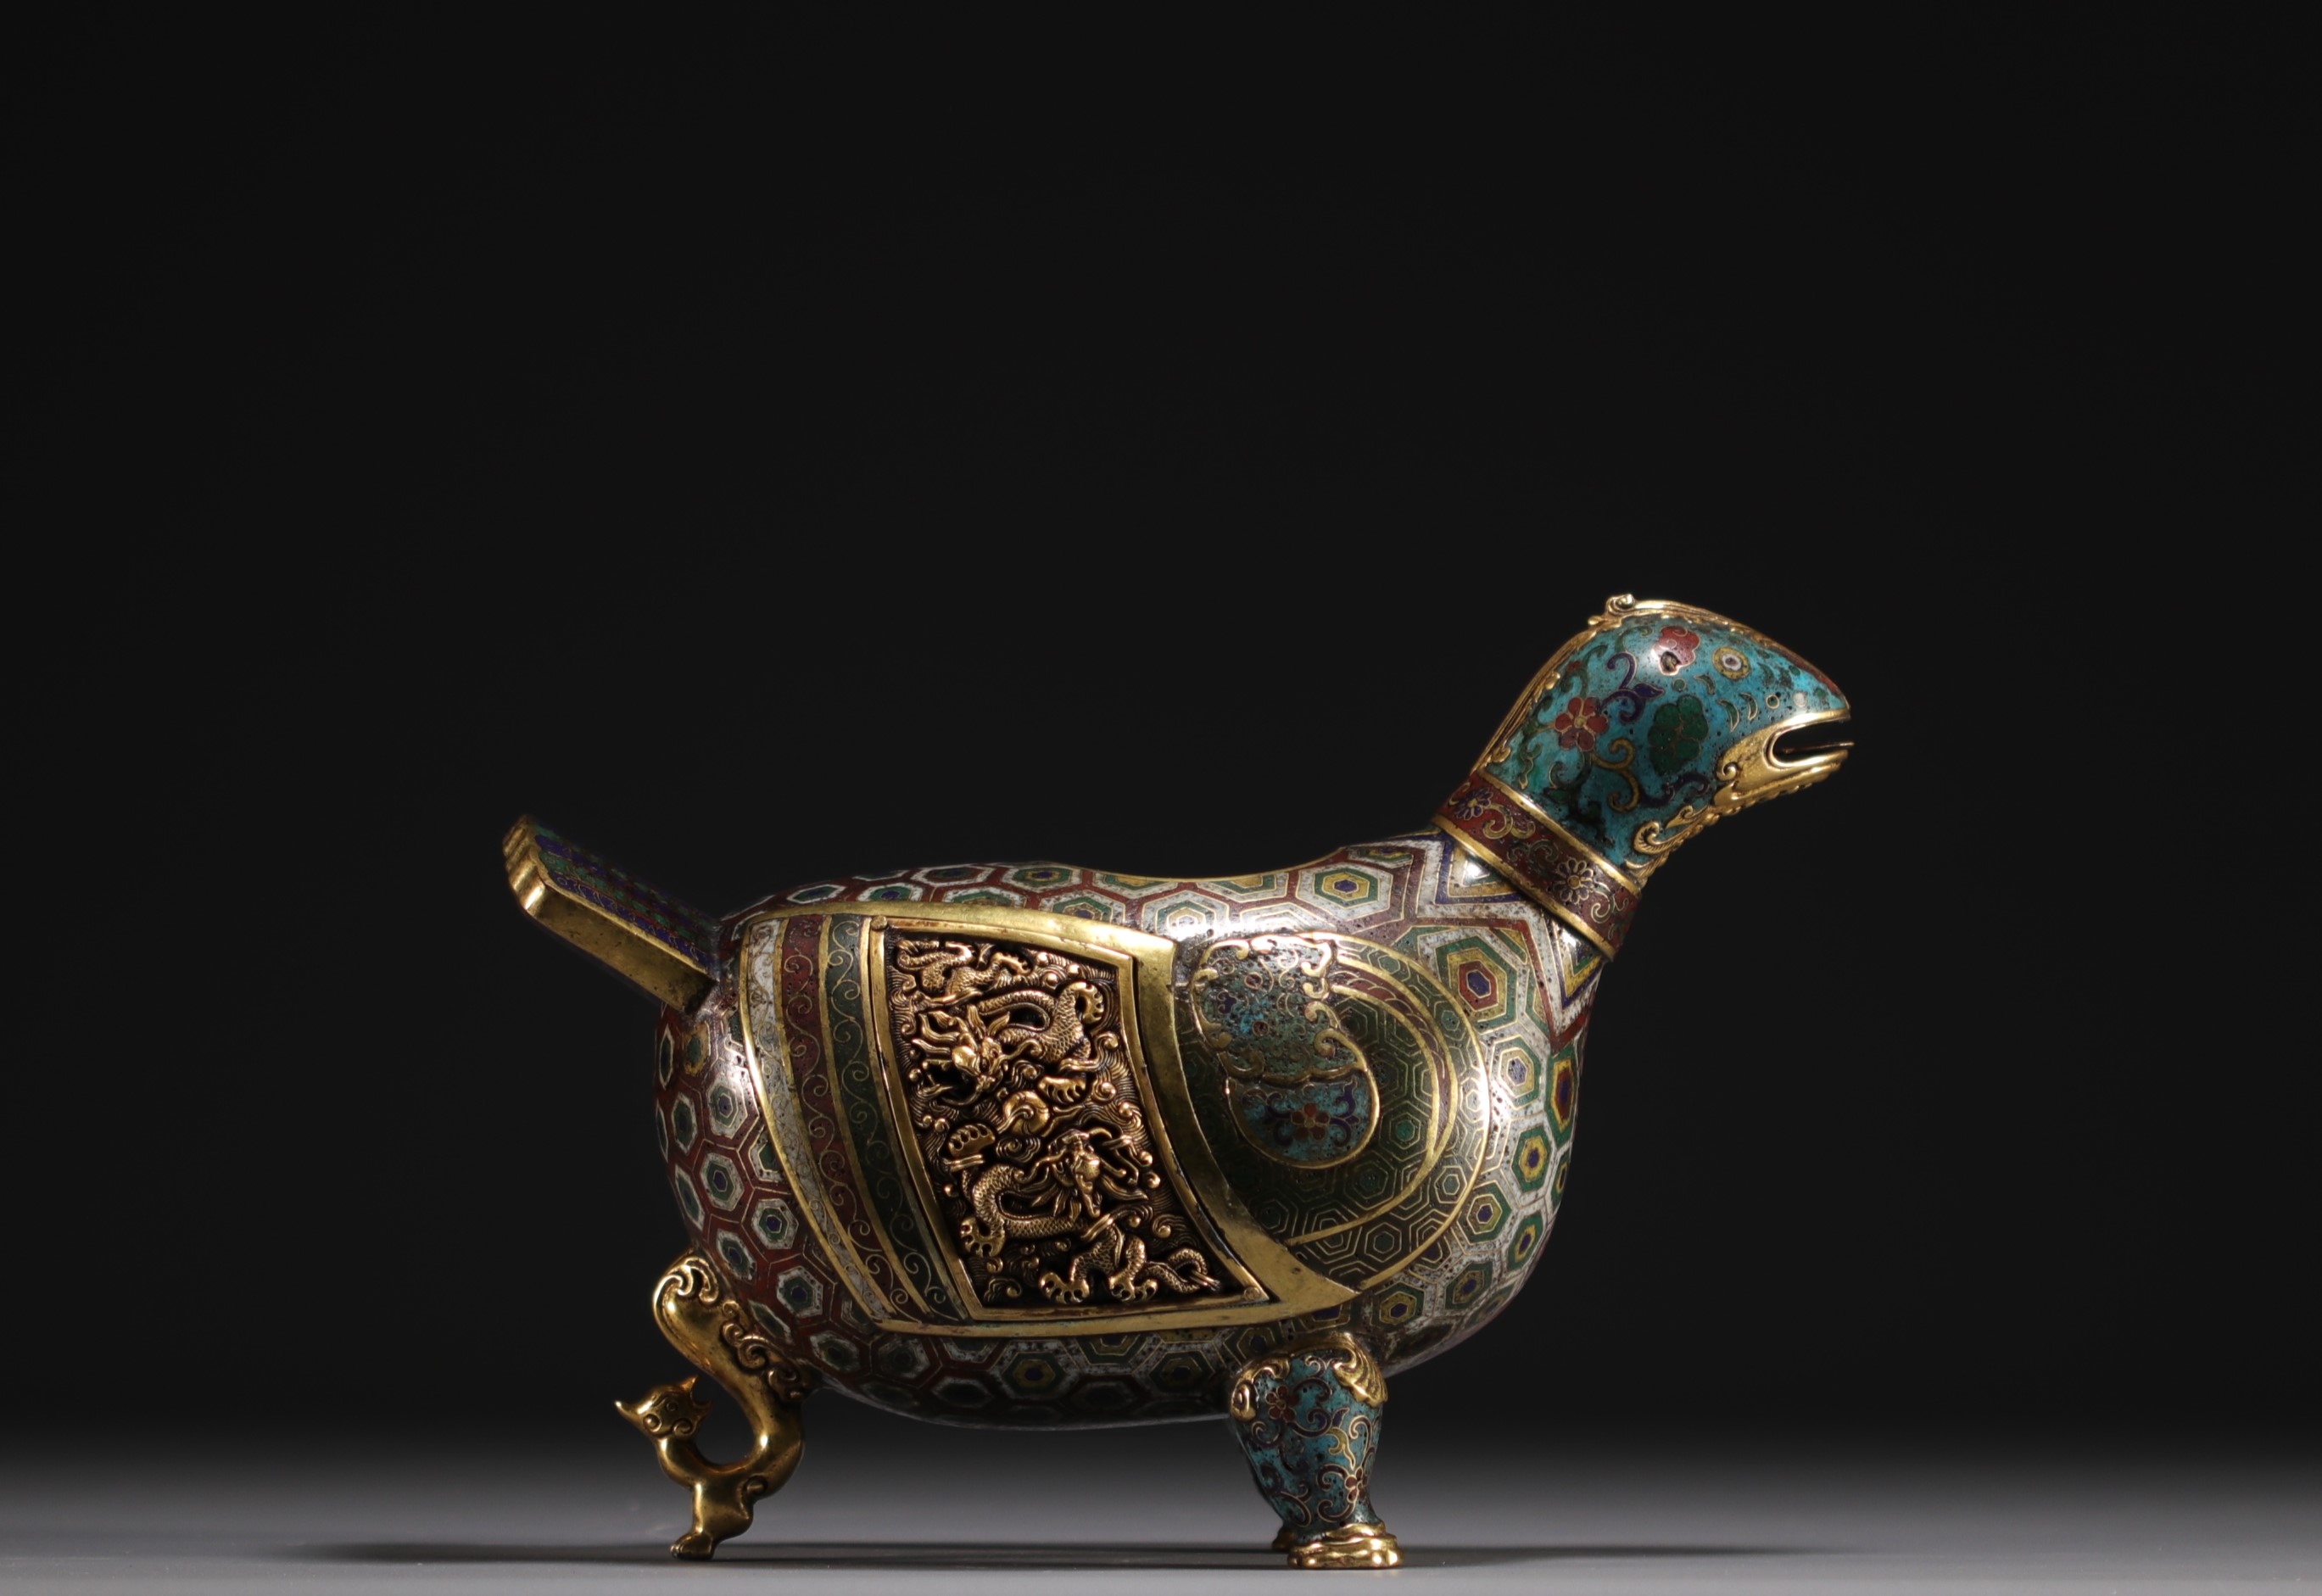 China - Bird-shaped cloisonne bronze perfume burner decorated with dragons, 18th century. - Image 2 of 7